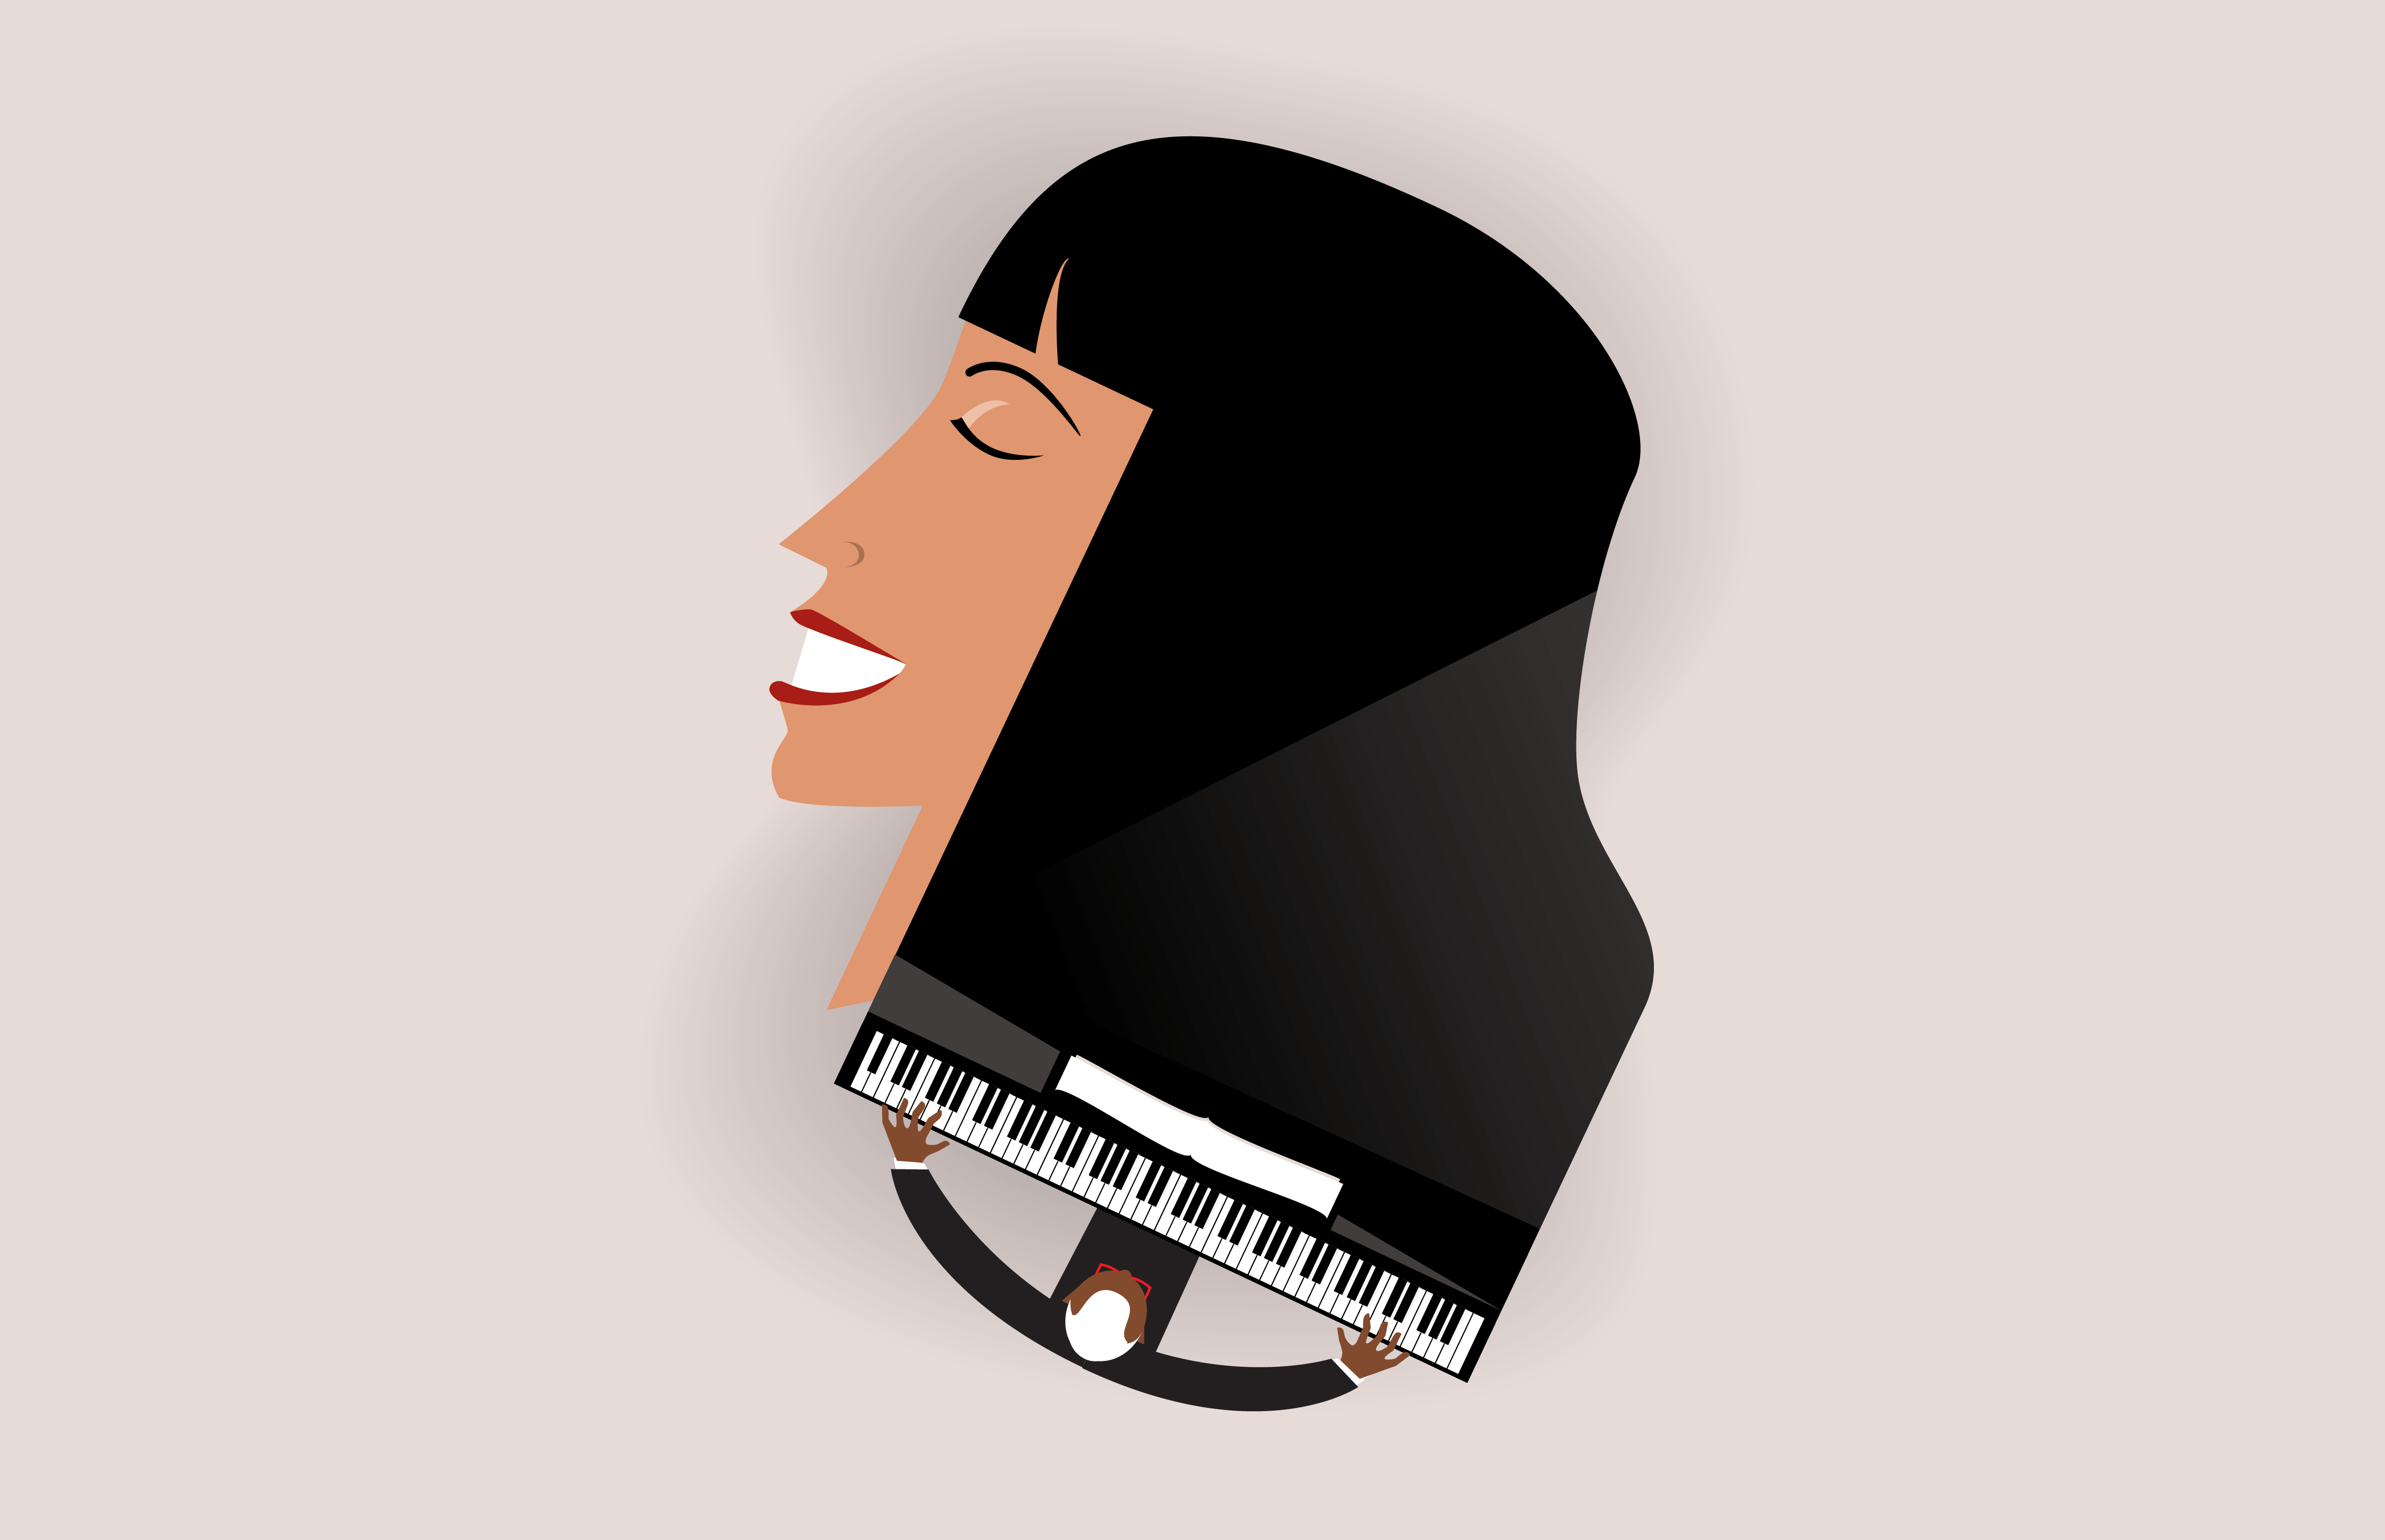 animated gif of person playing a piano that is shaped like a face